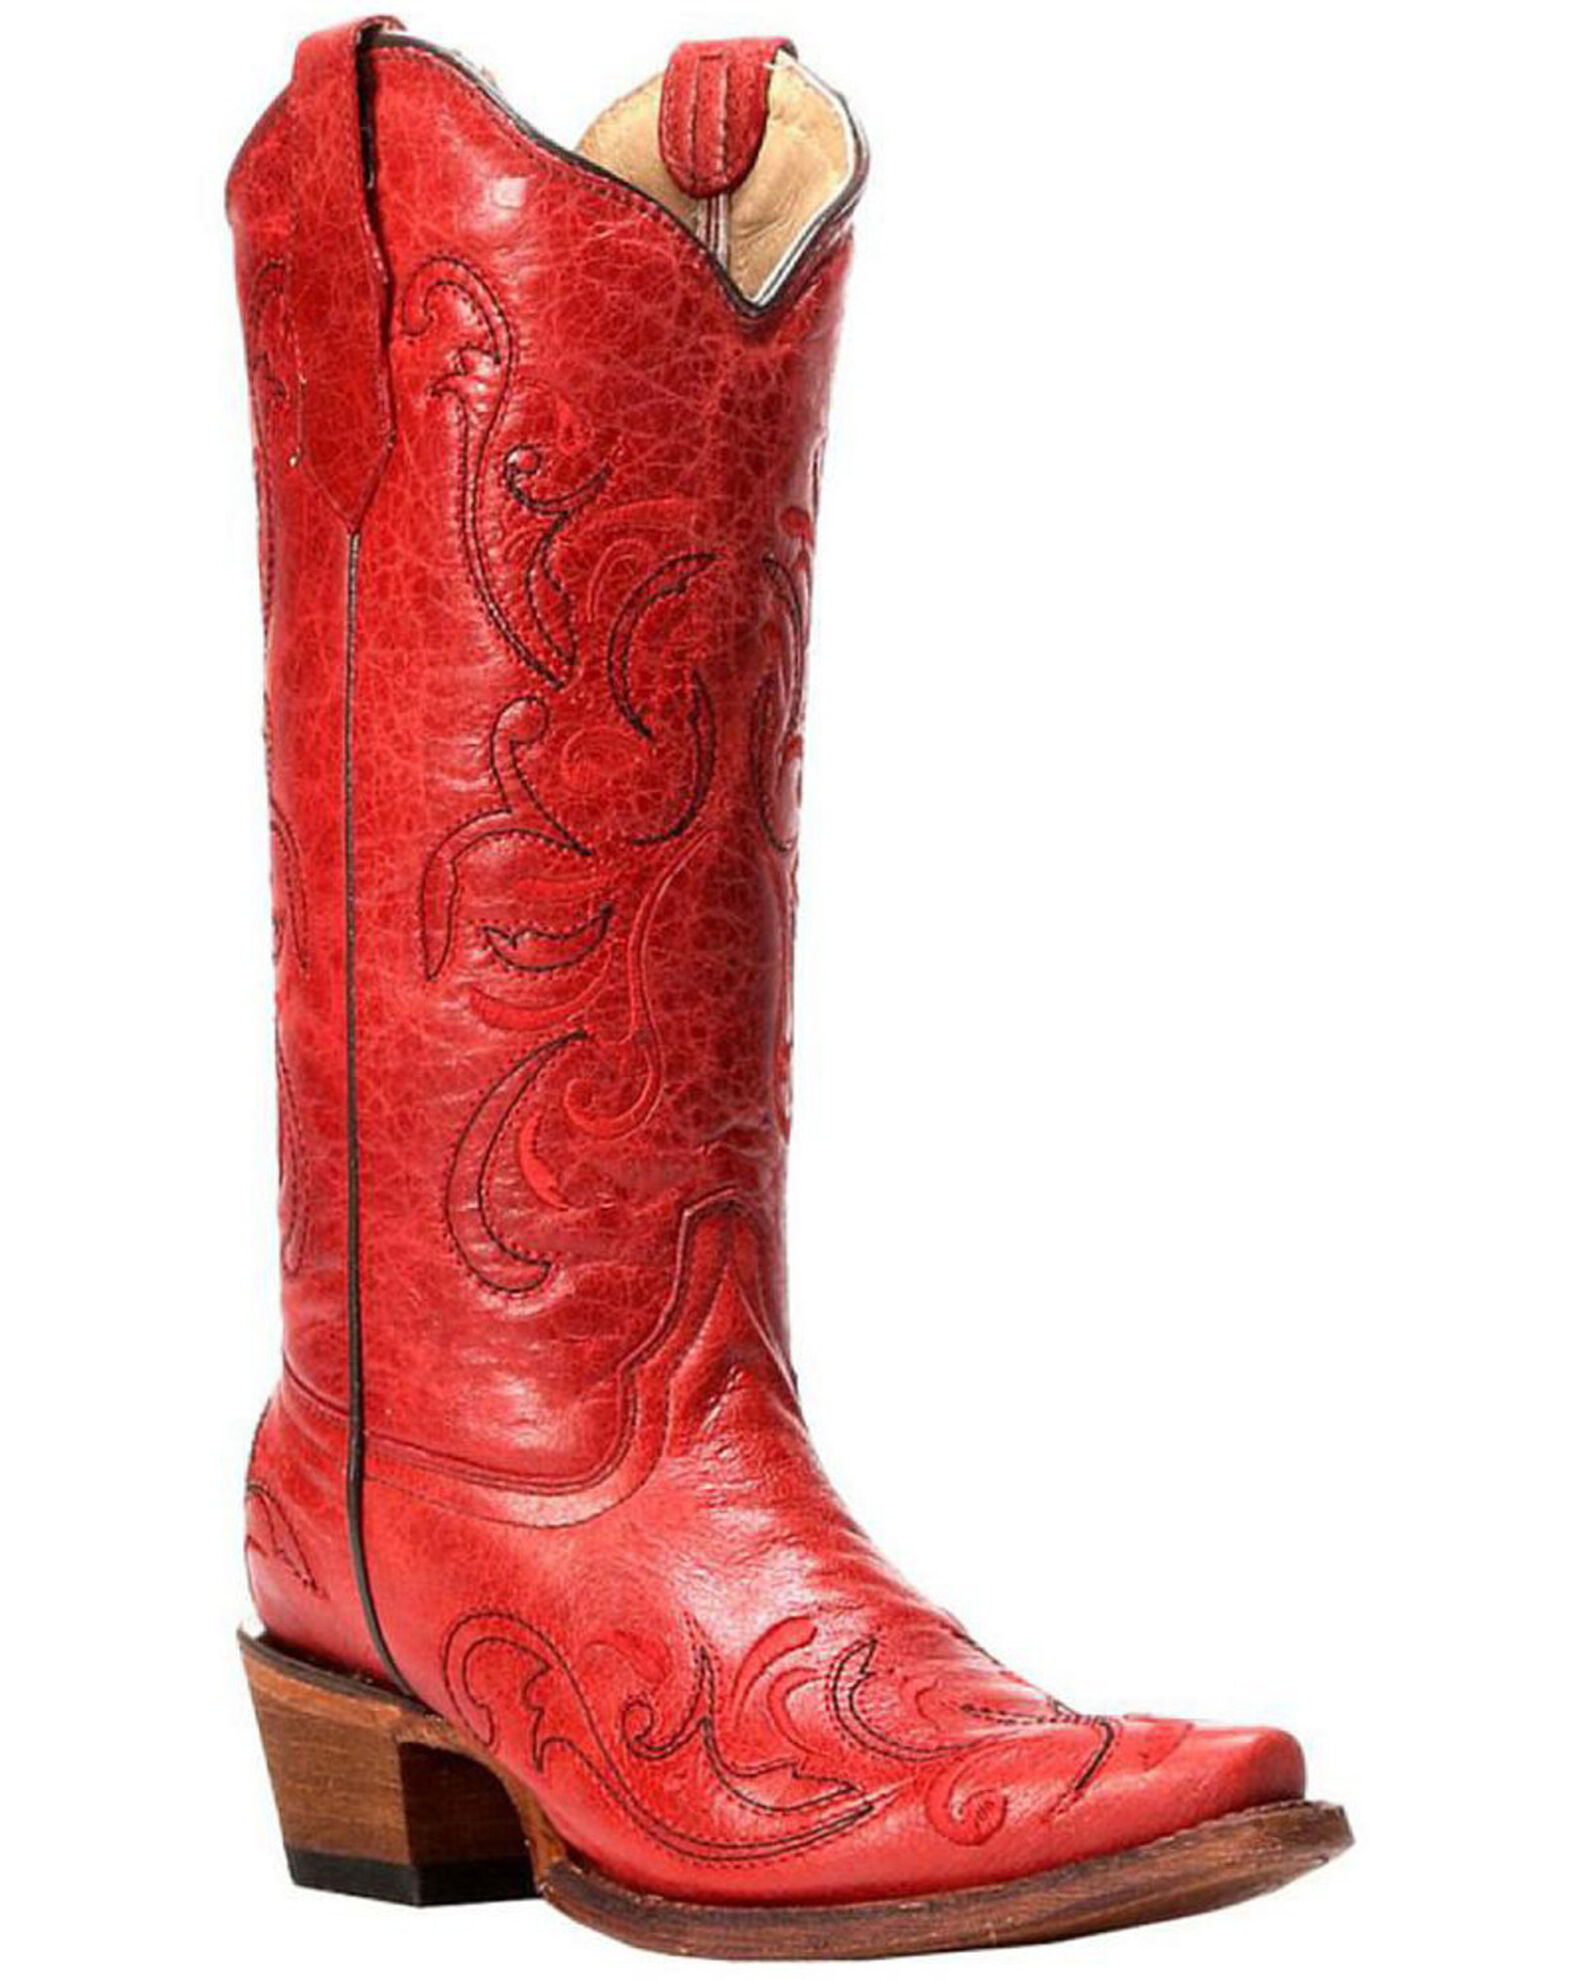 Circle G by Corral Women's Embroidery Snip Toe Western Boots